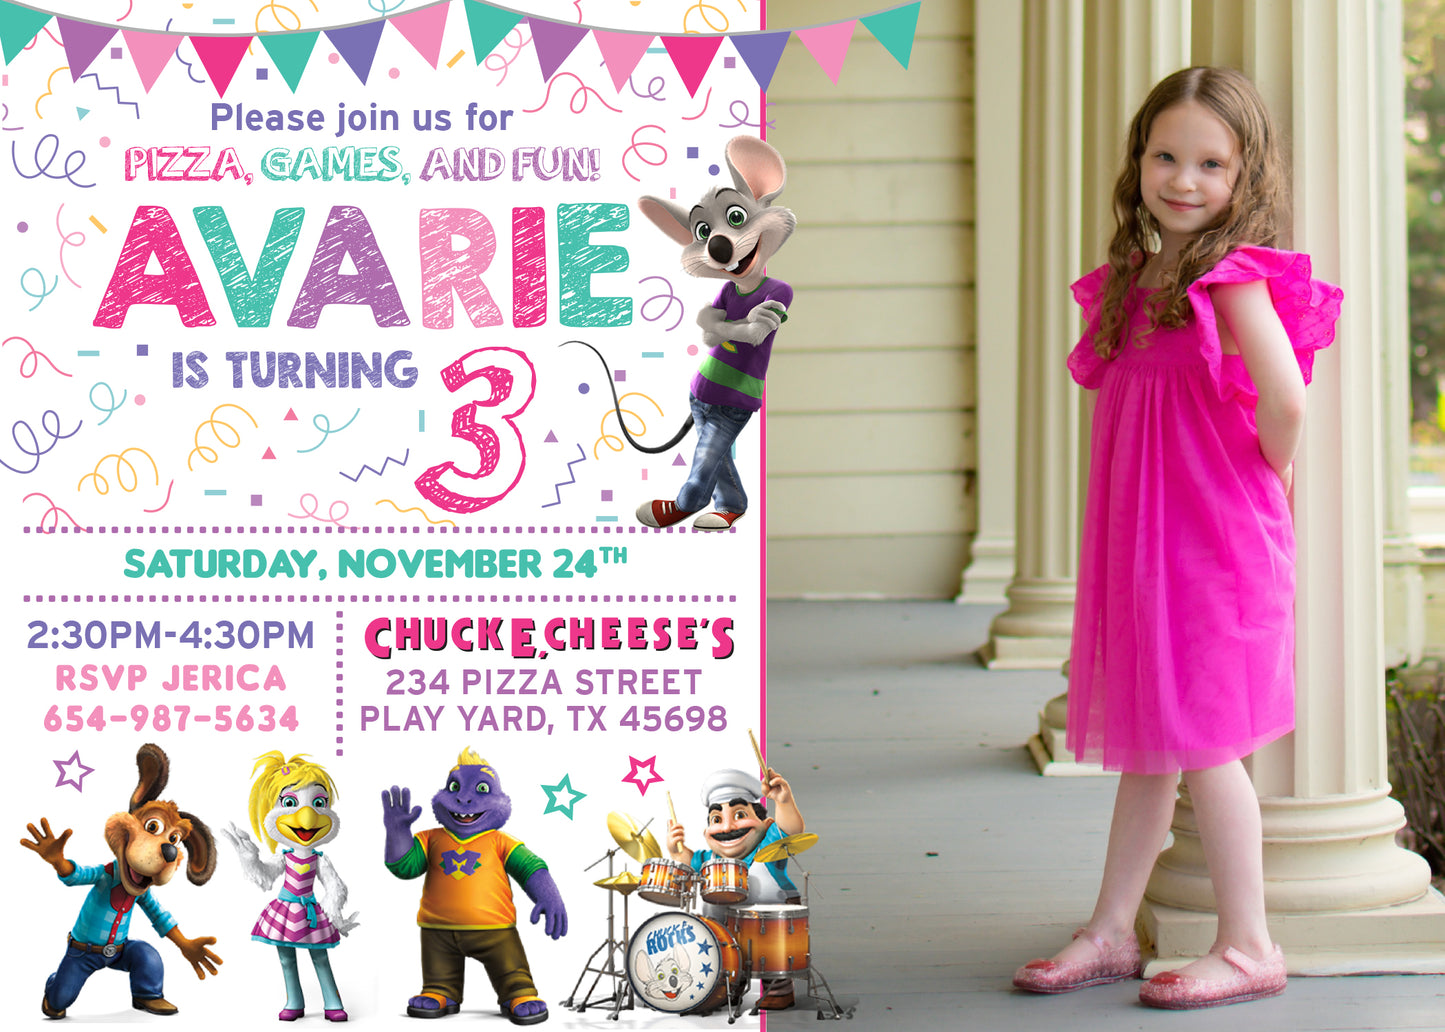 Printed or Digital CHUCK E CHEESE Girl Birthday Party Invitation with or without Photo!